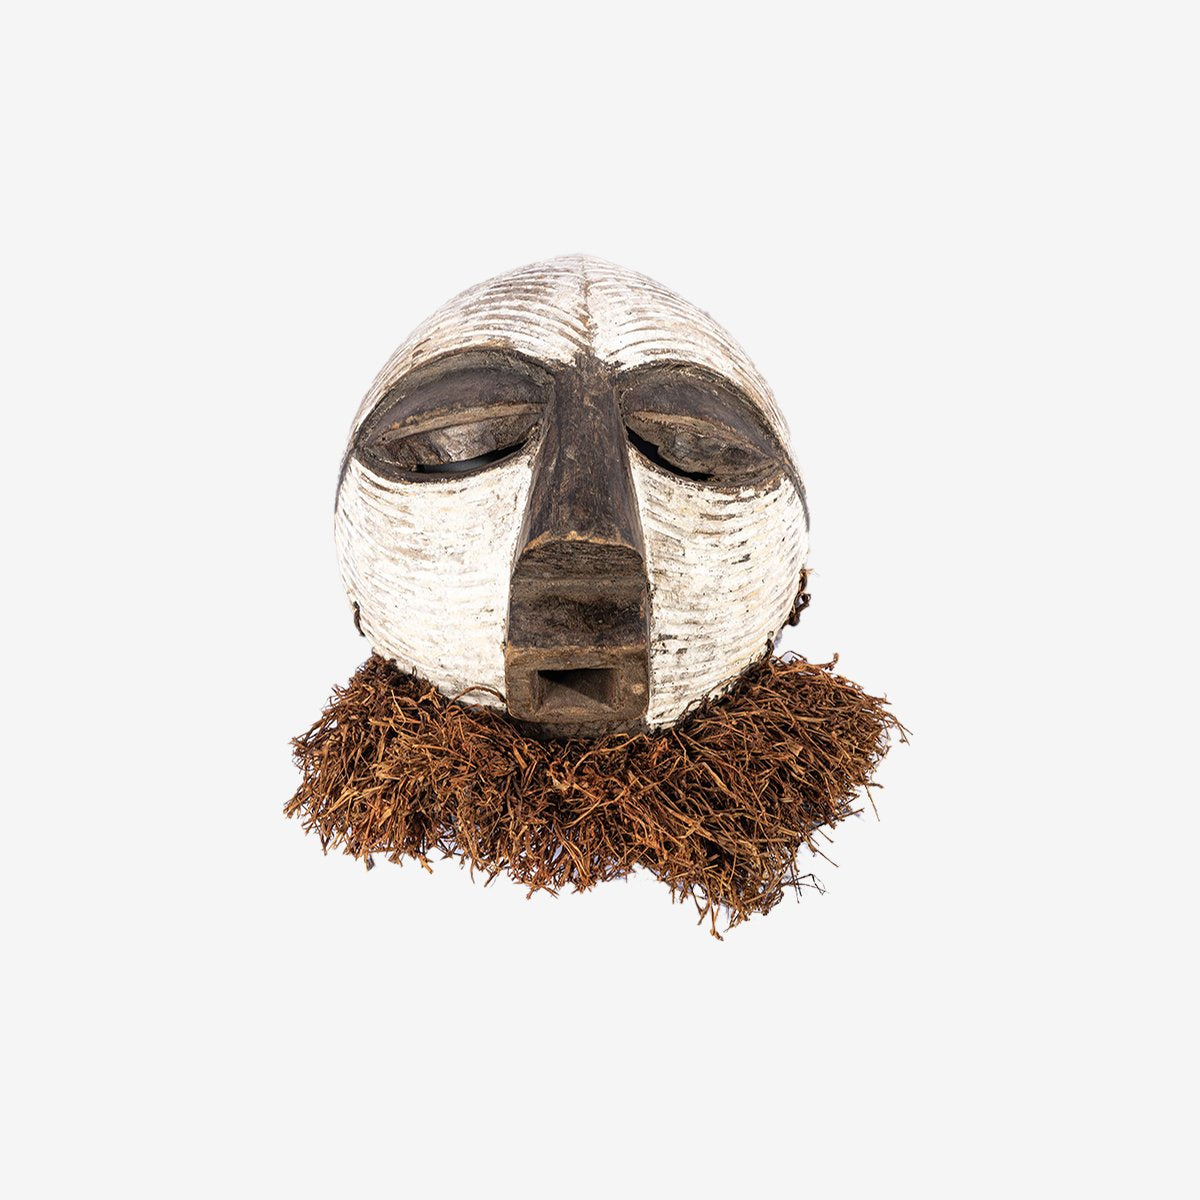 Luba Round Mask - Authentic African handicrafts | Clothing, bags, painting, toys & more - CULTURE HUB by Muthoni Unchained